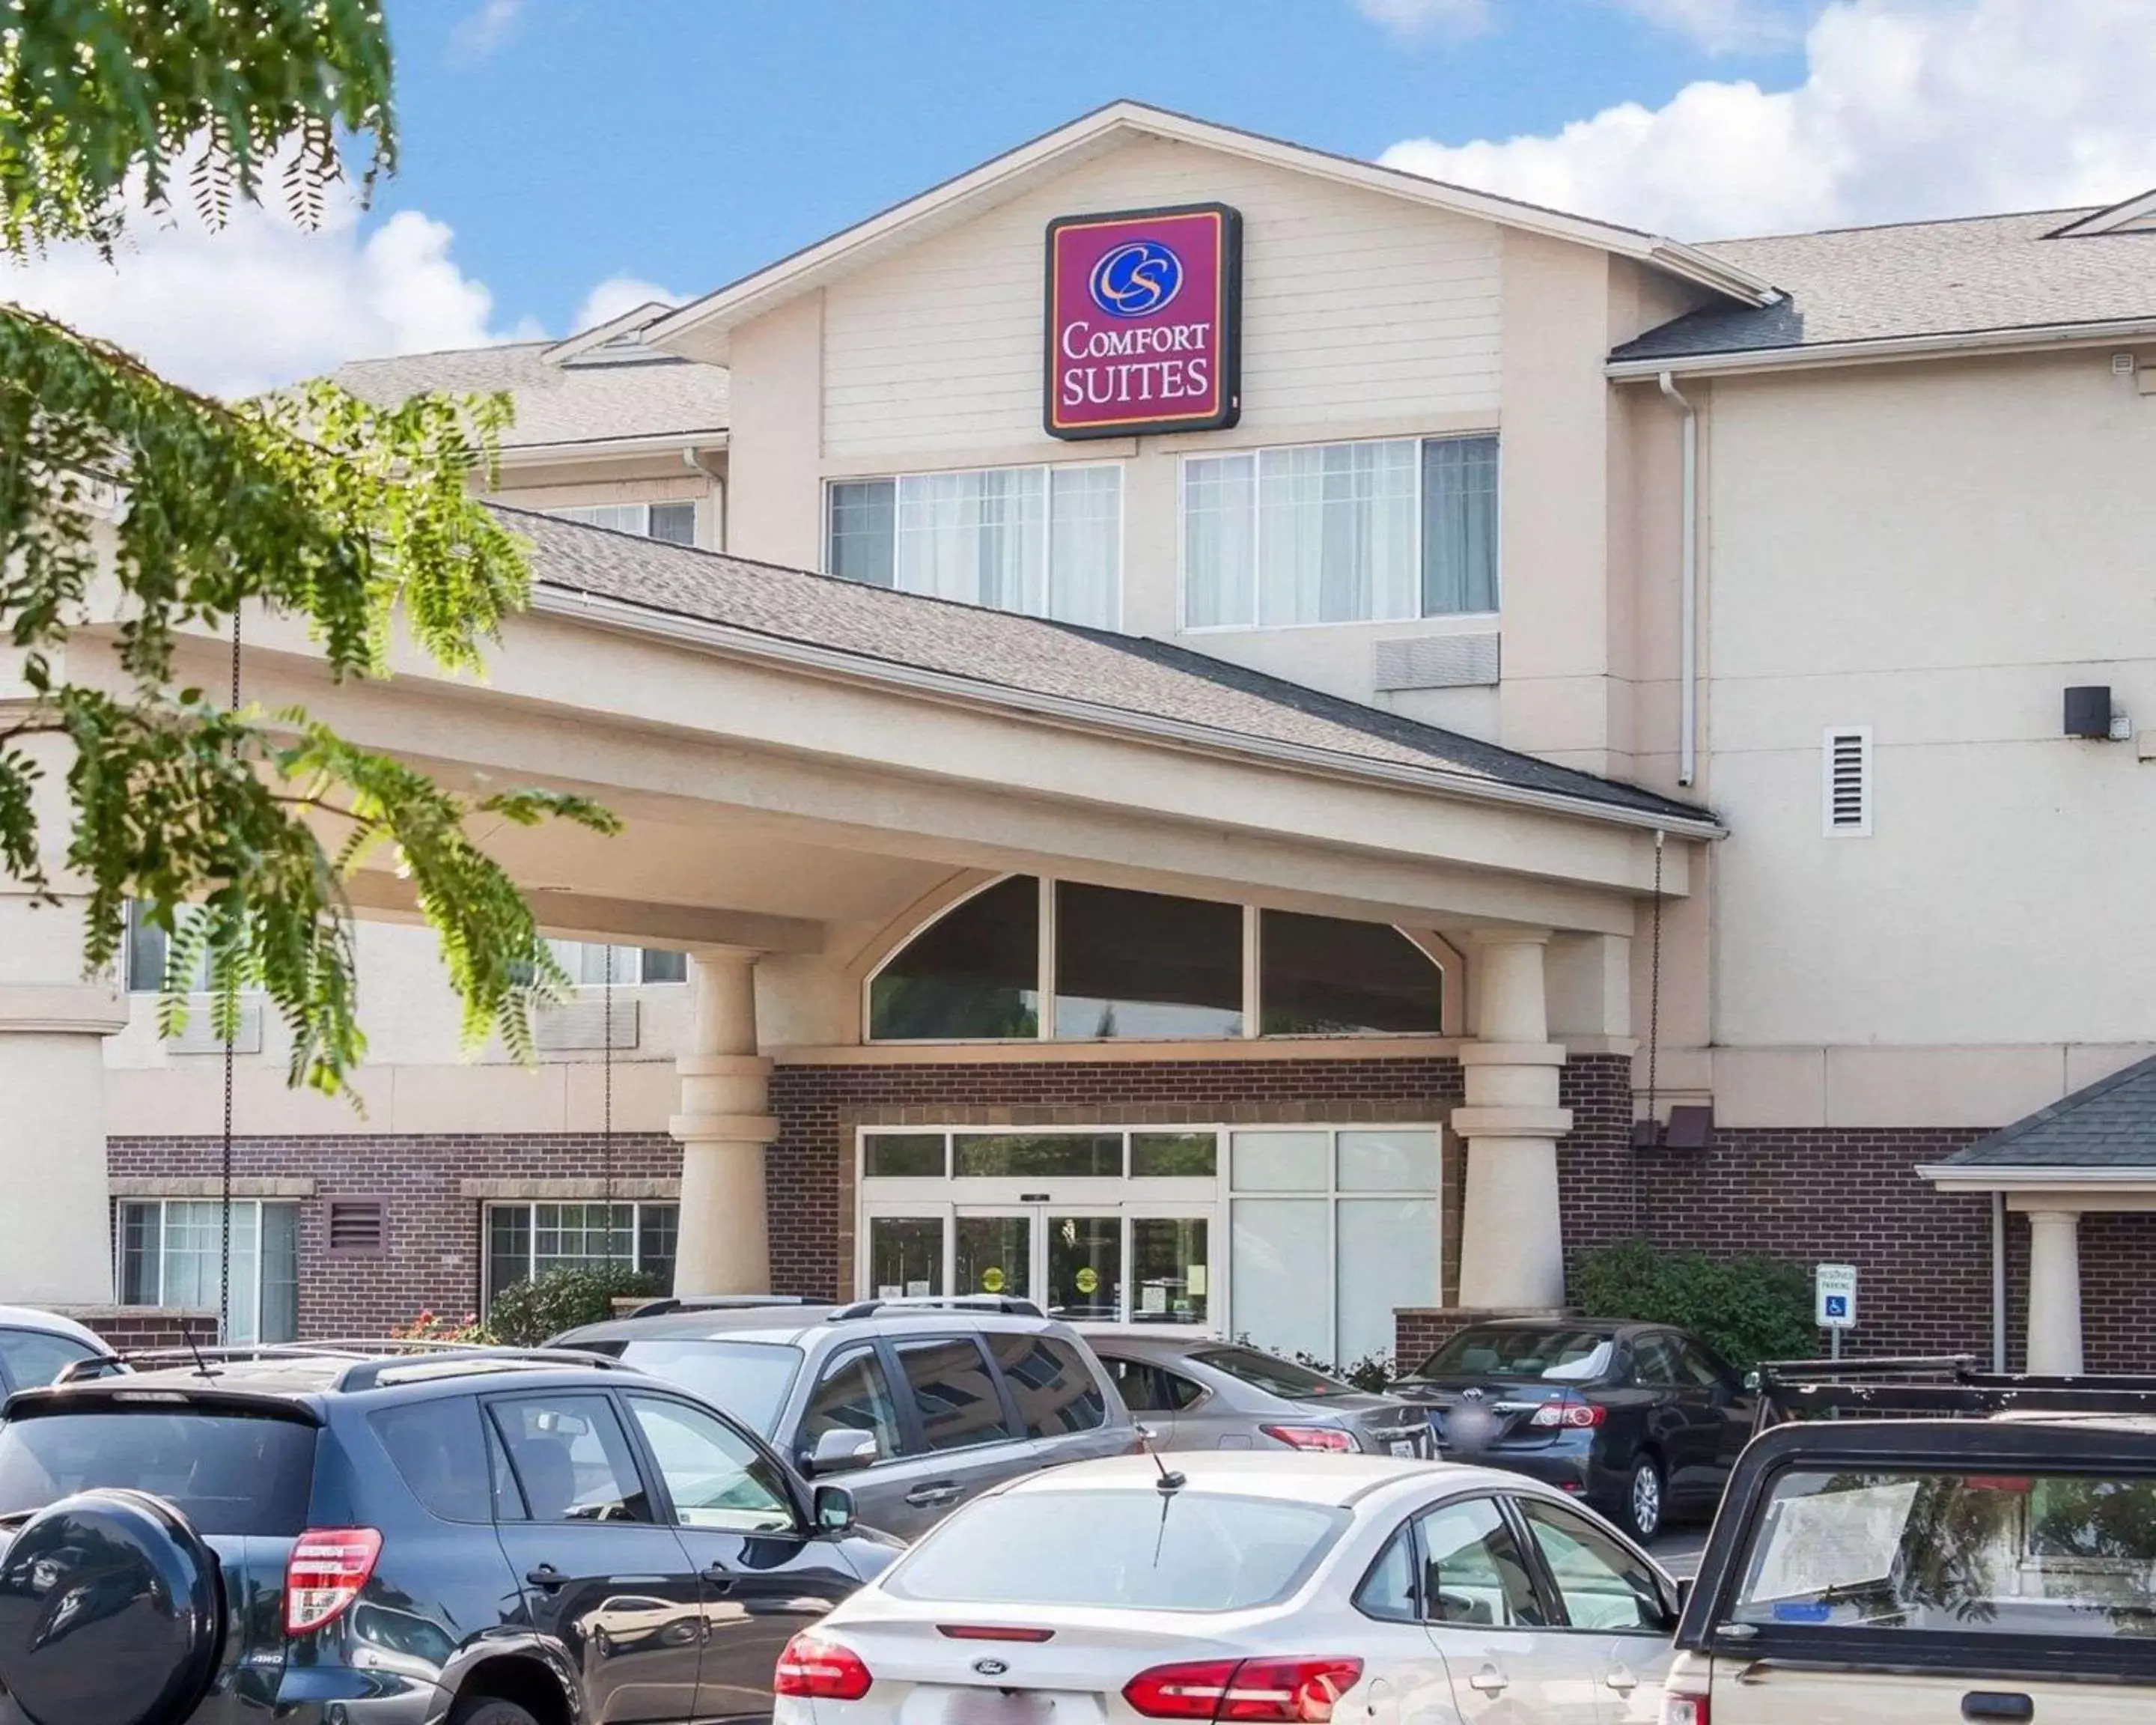 Property Building in Comfort Suites Boise Airport